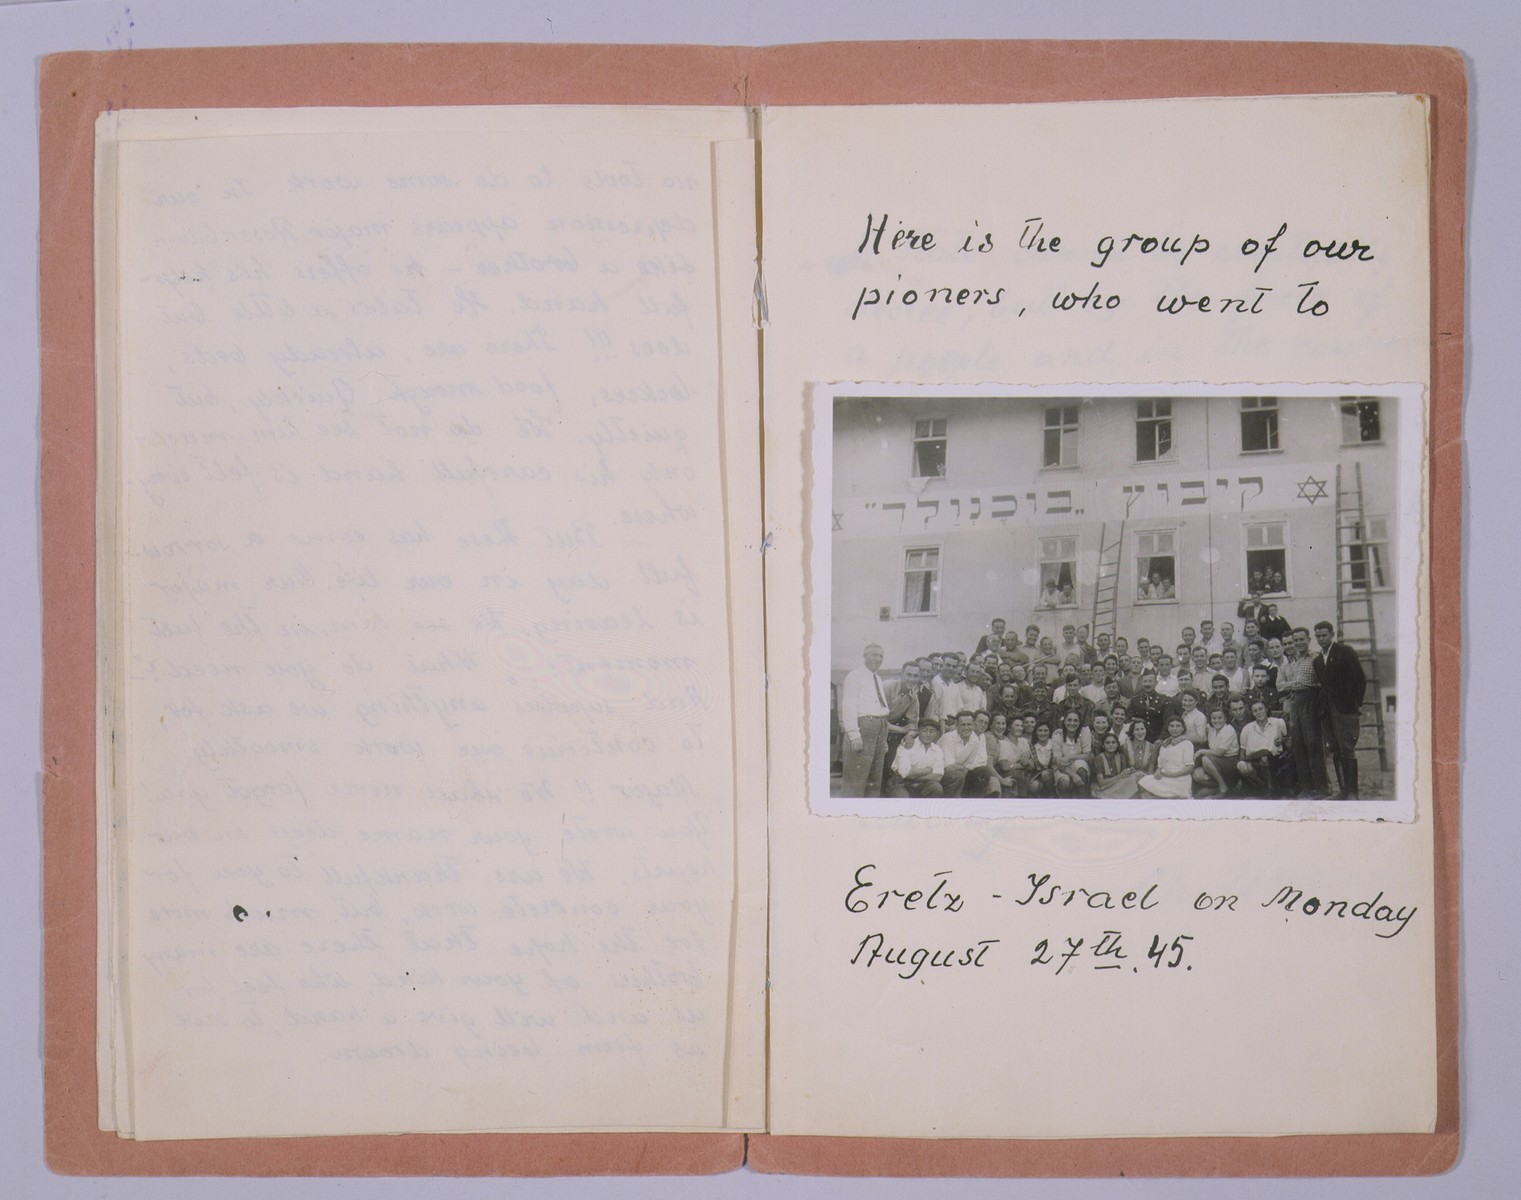 One page of a booklet produced by a member of the hachshara (Zionist collective) Kibbutz Buchenwald, featuring a group portrait of members of the collective taken beneath the Kibbutz Buchenwald banner.

The group in the photograph photograph departed for Palestine on August 27, 1945.